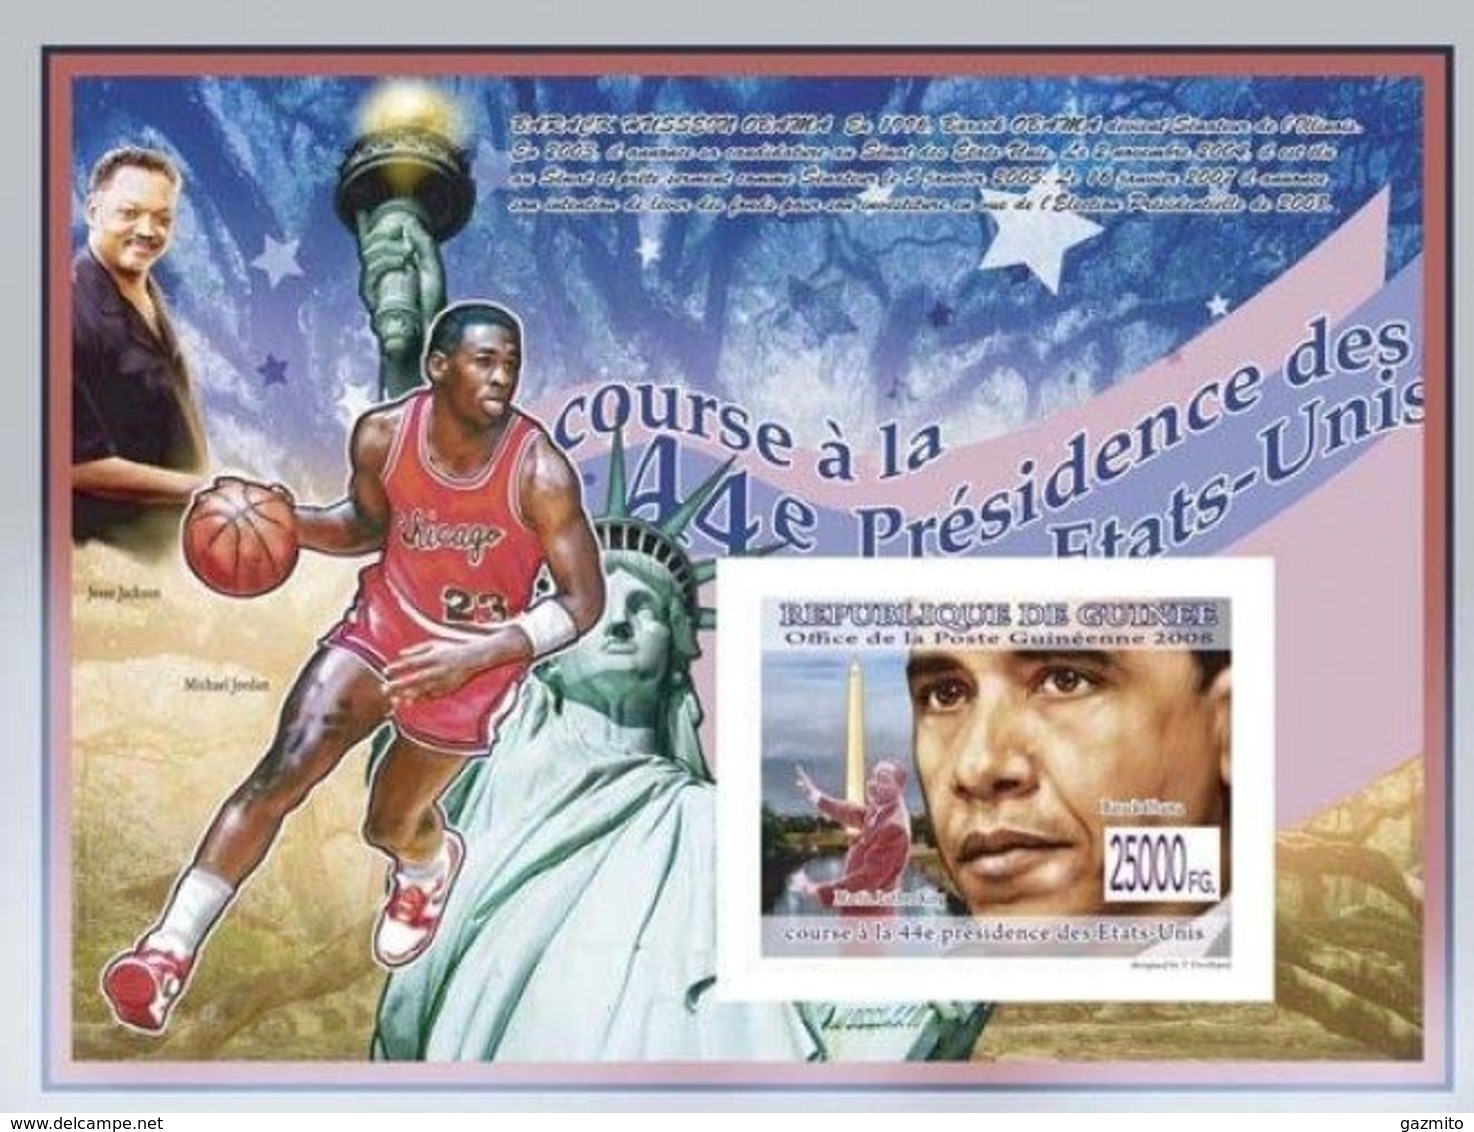 Guinea 2008, President Obama, Basketball, M. Luter King, BF IMPERFORATED - Martin Luther King